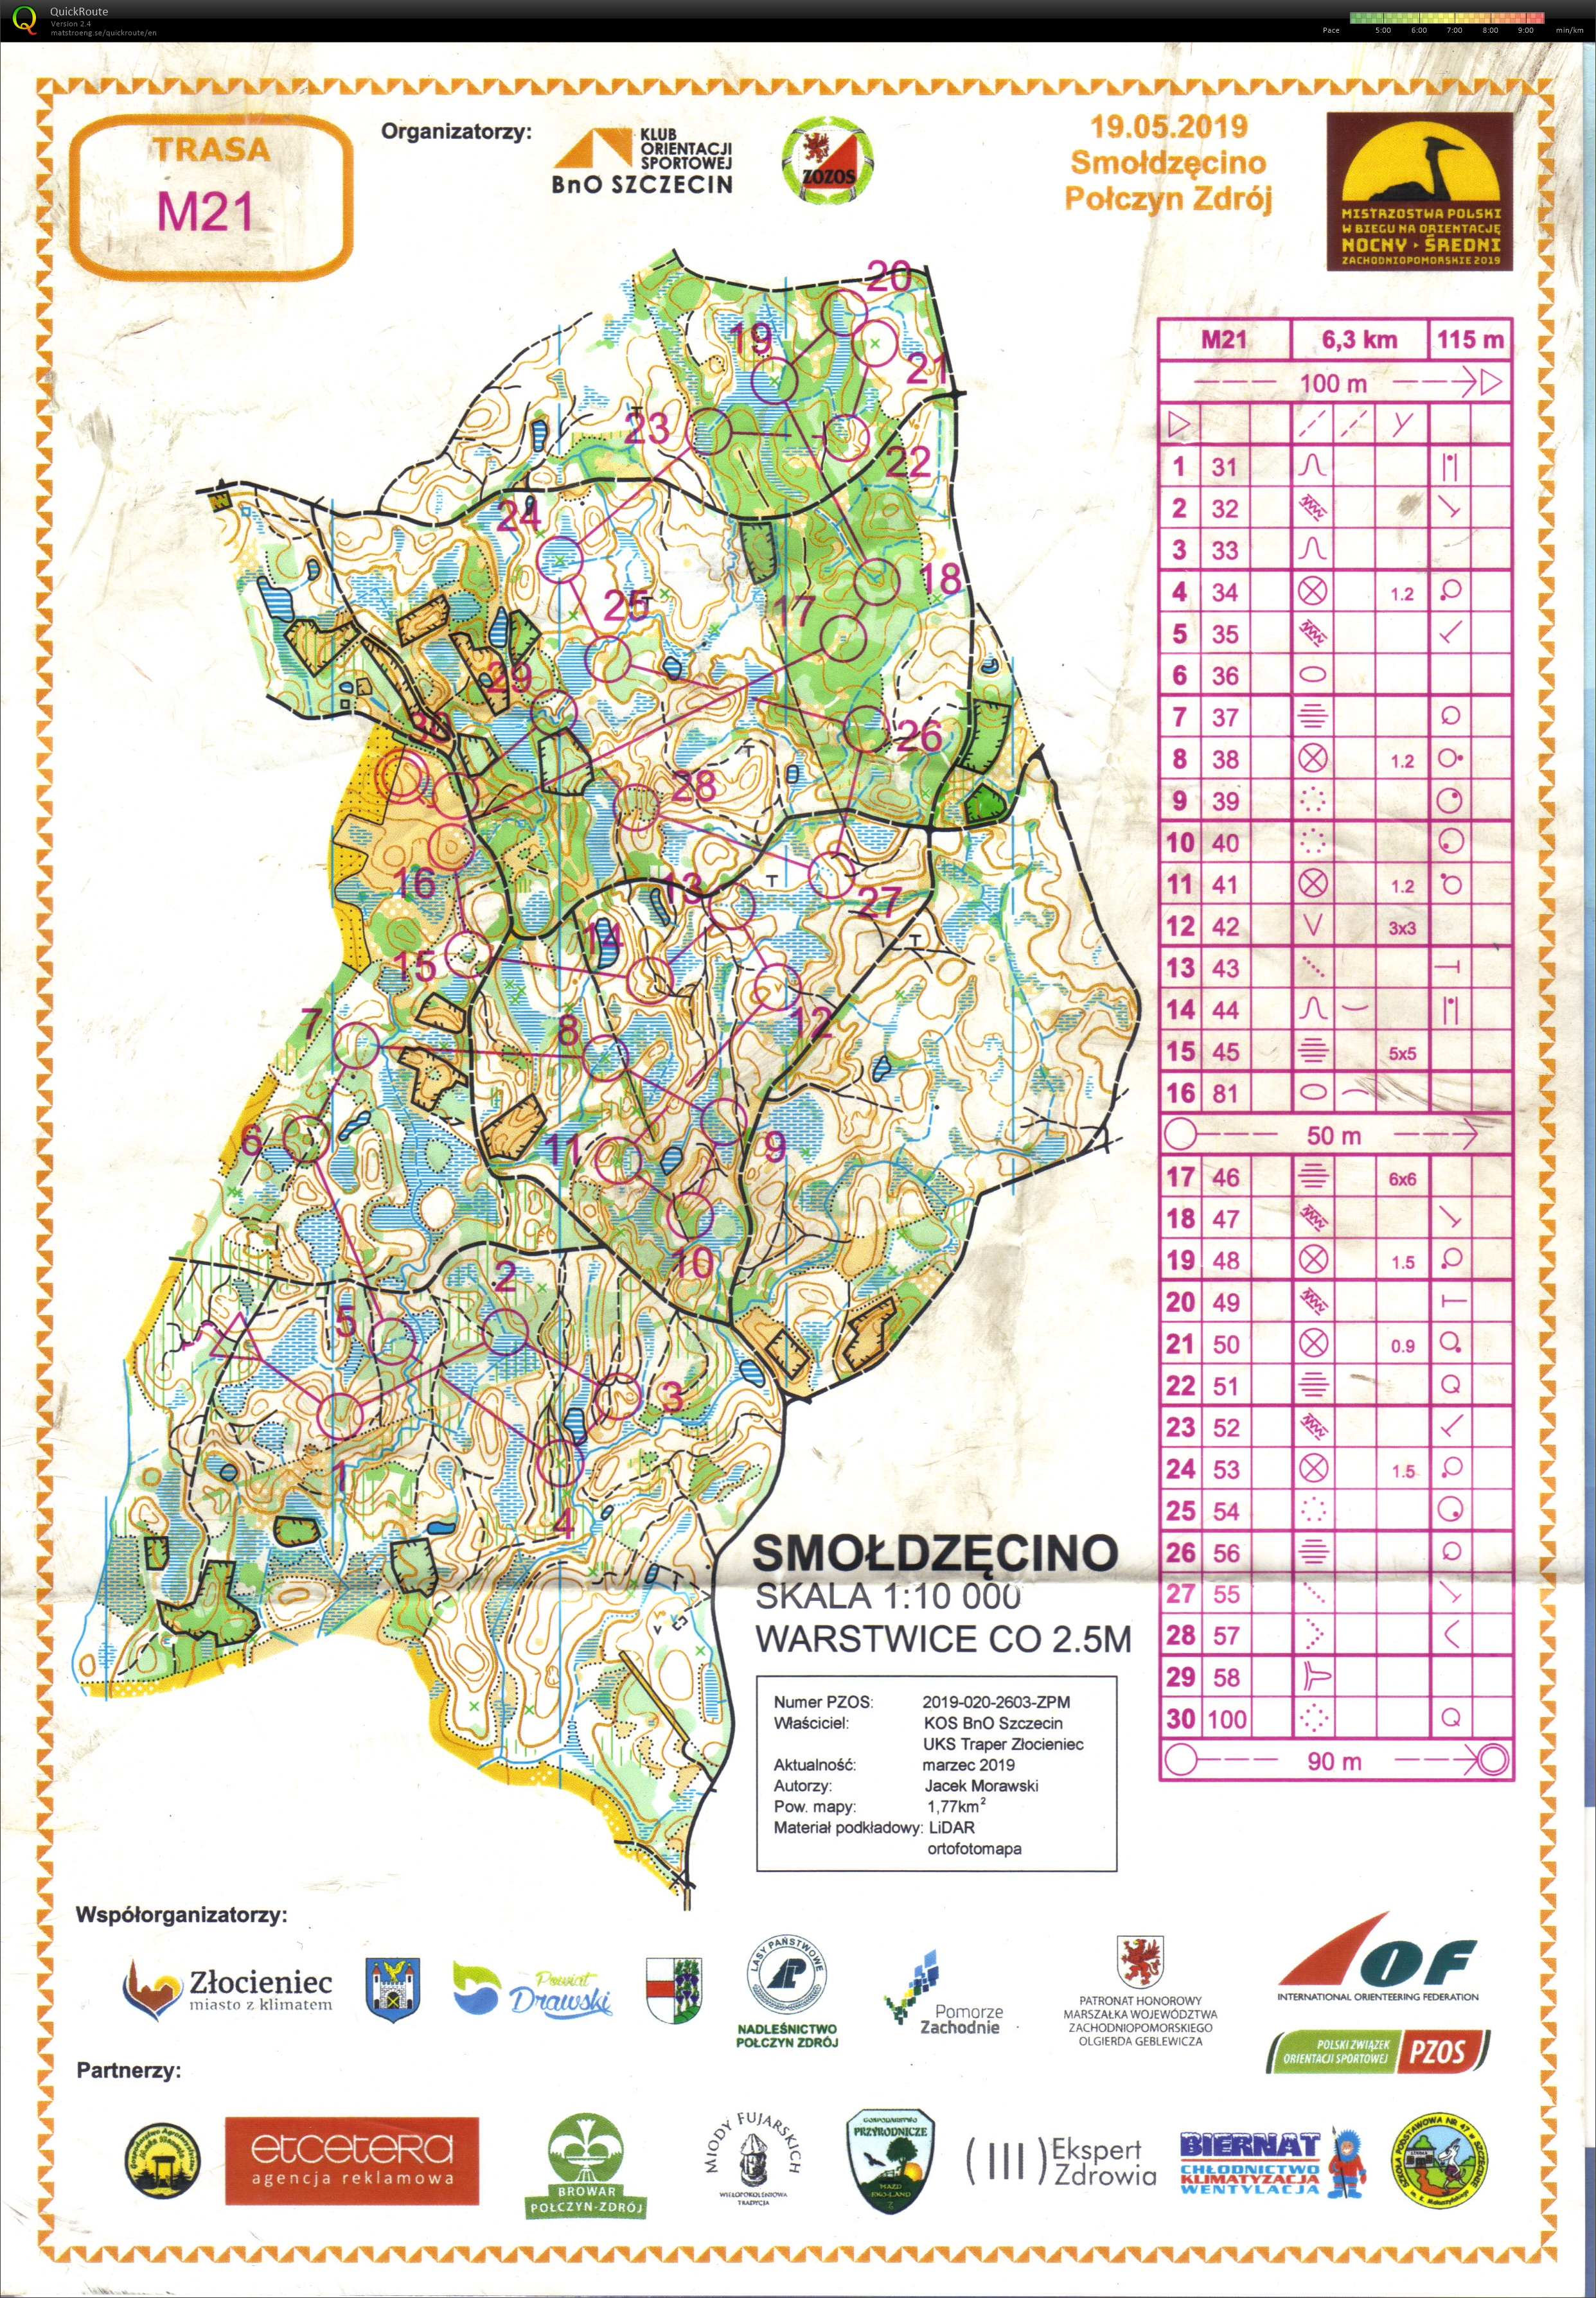 Z667 - Polish Middle Orienteering Championships - middle WRE (20-05-2019)